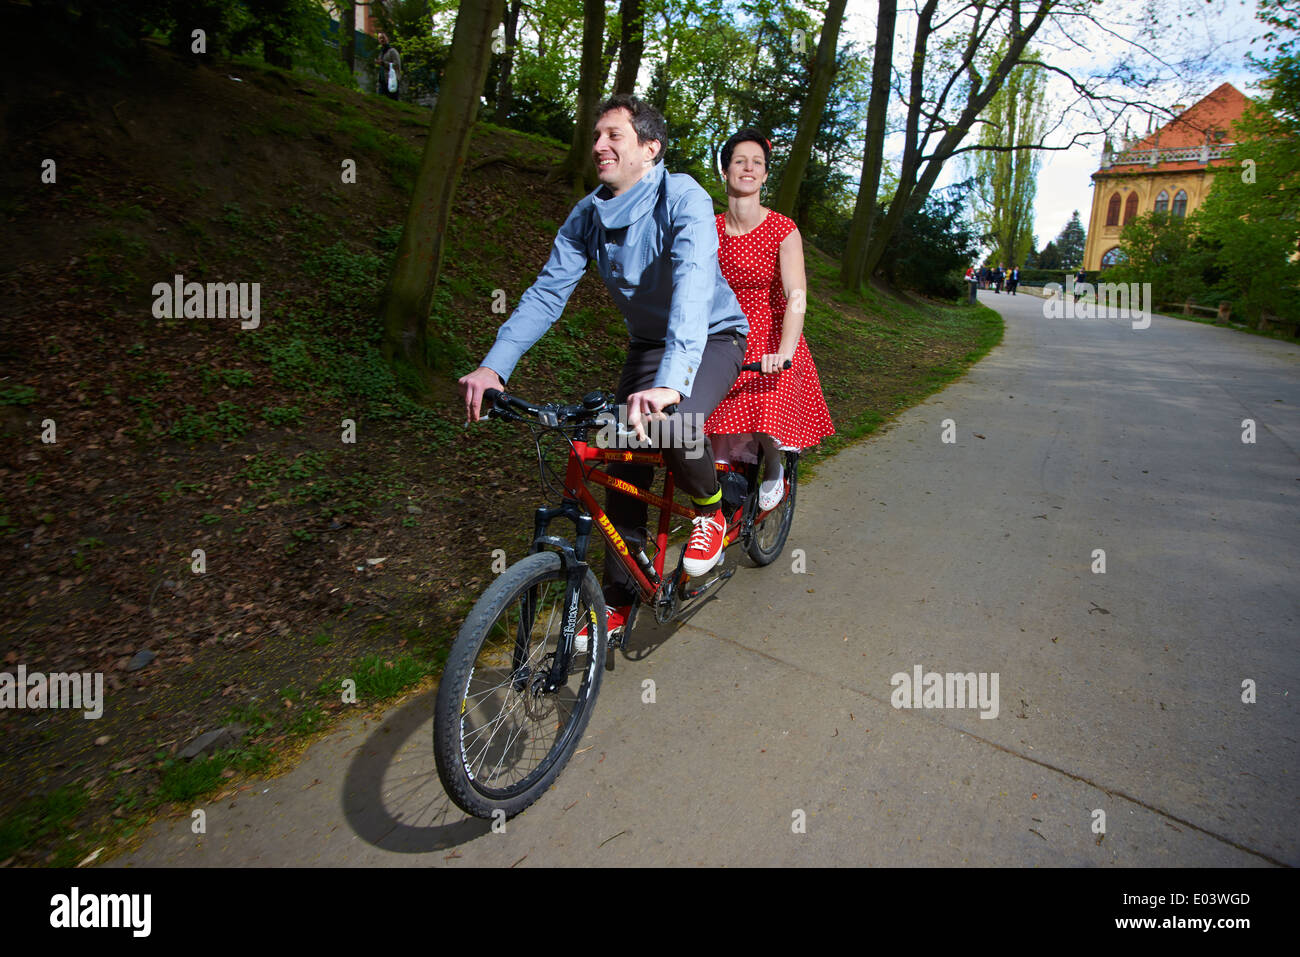 Couple young man and woman riding a tandem bicycle, cycling in the park Stock Photo